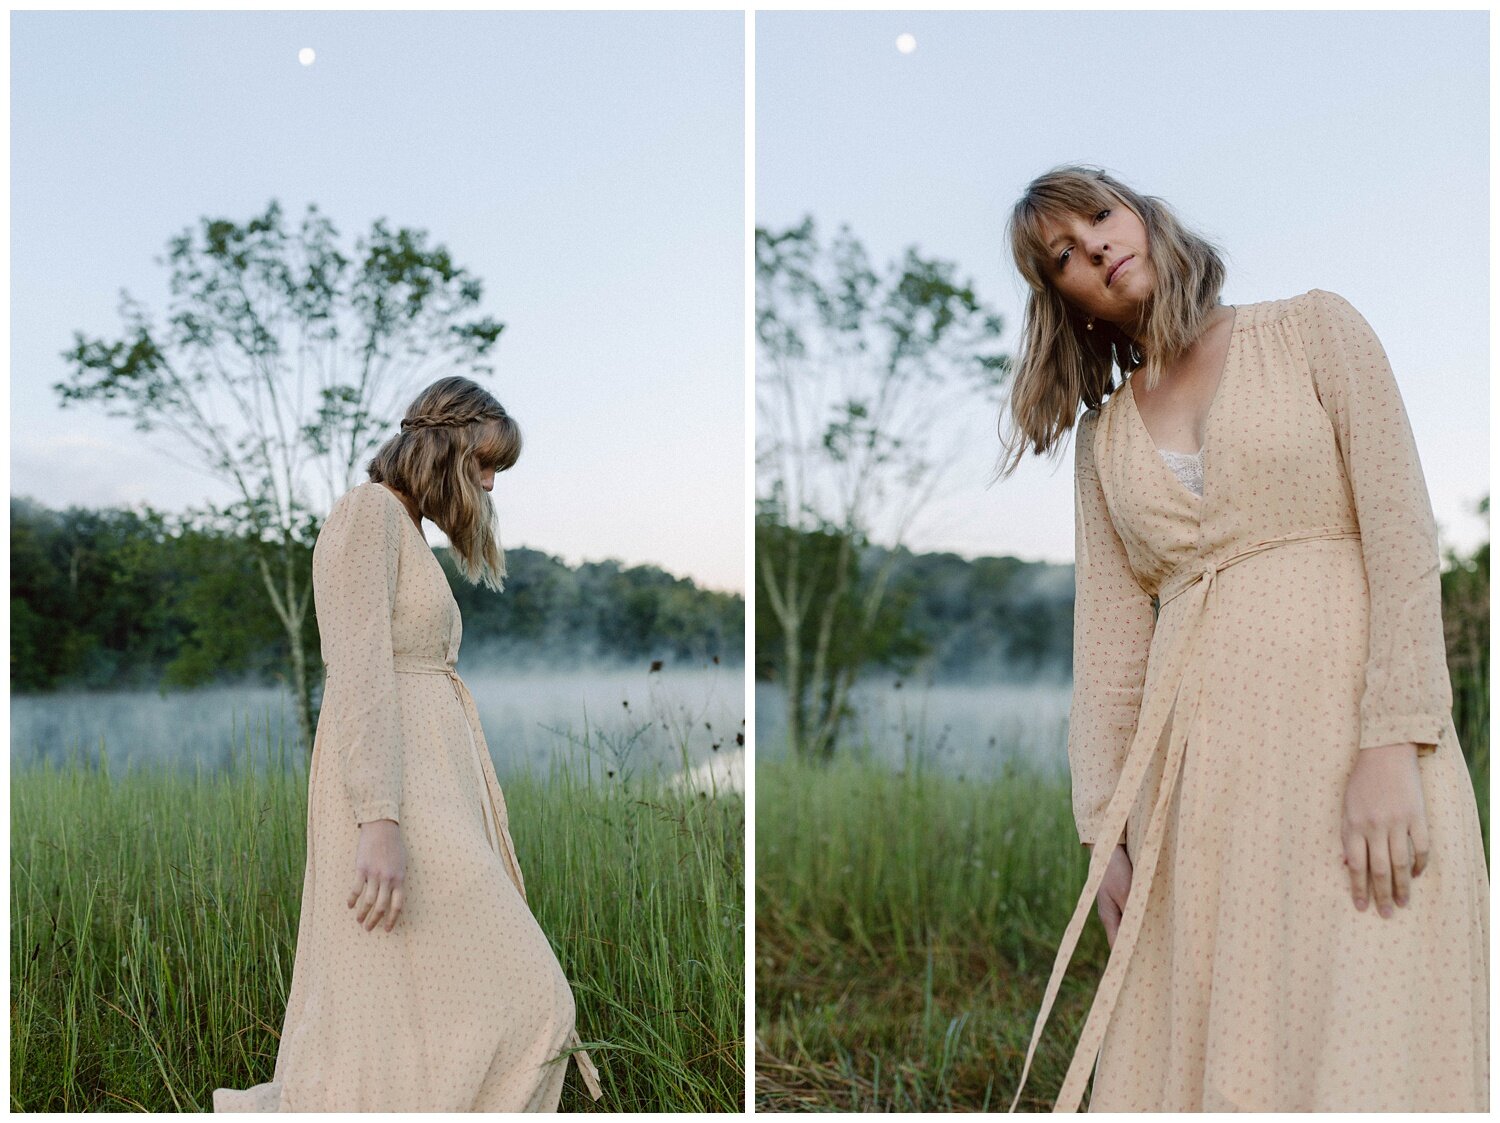 Kendra_Farris_Photography_folklore.inspired.photoshoot.taylor.swift-6.jpg